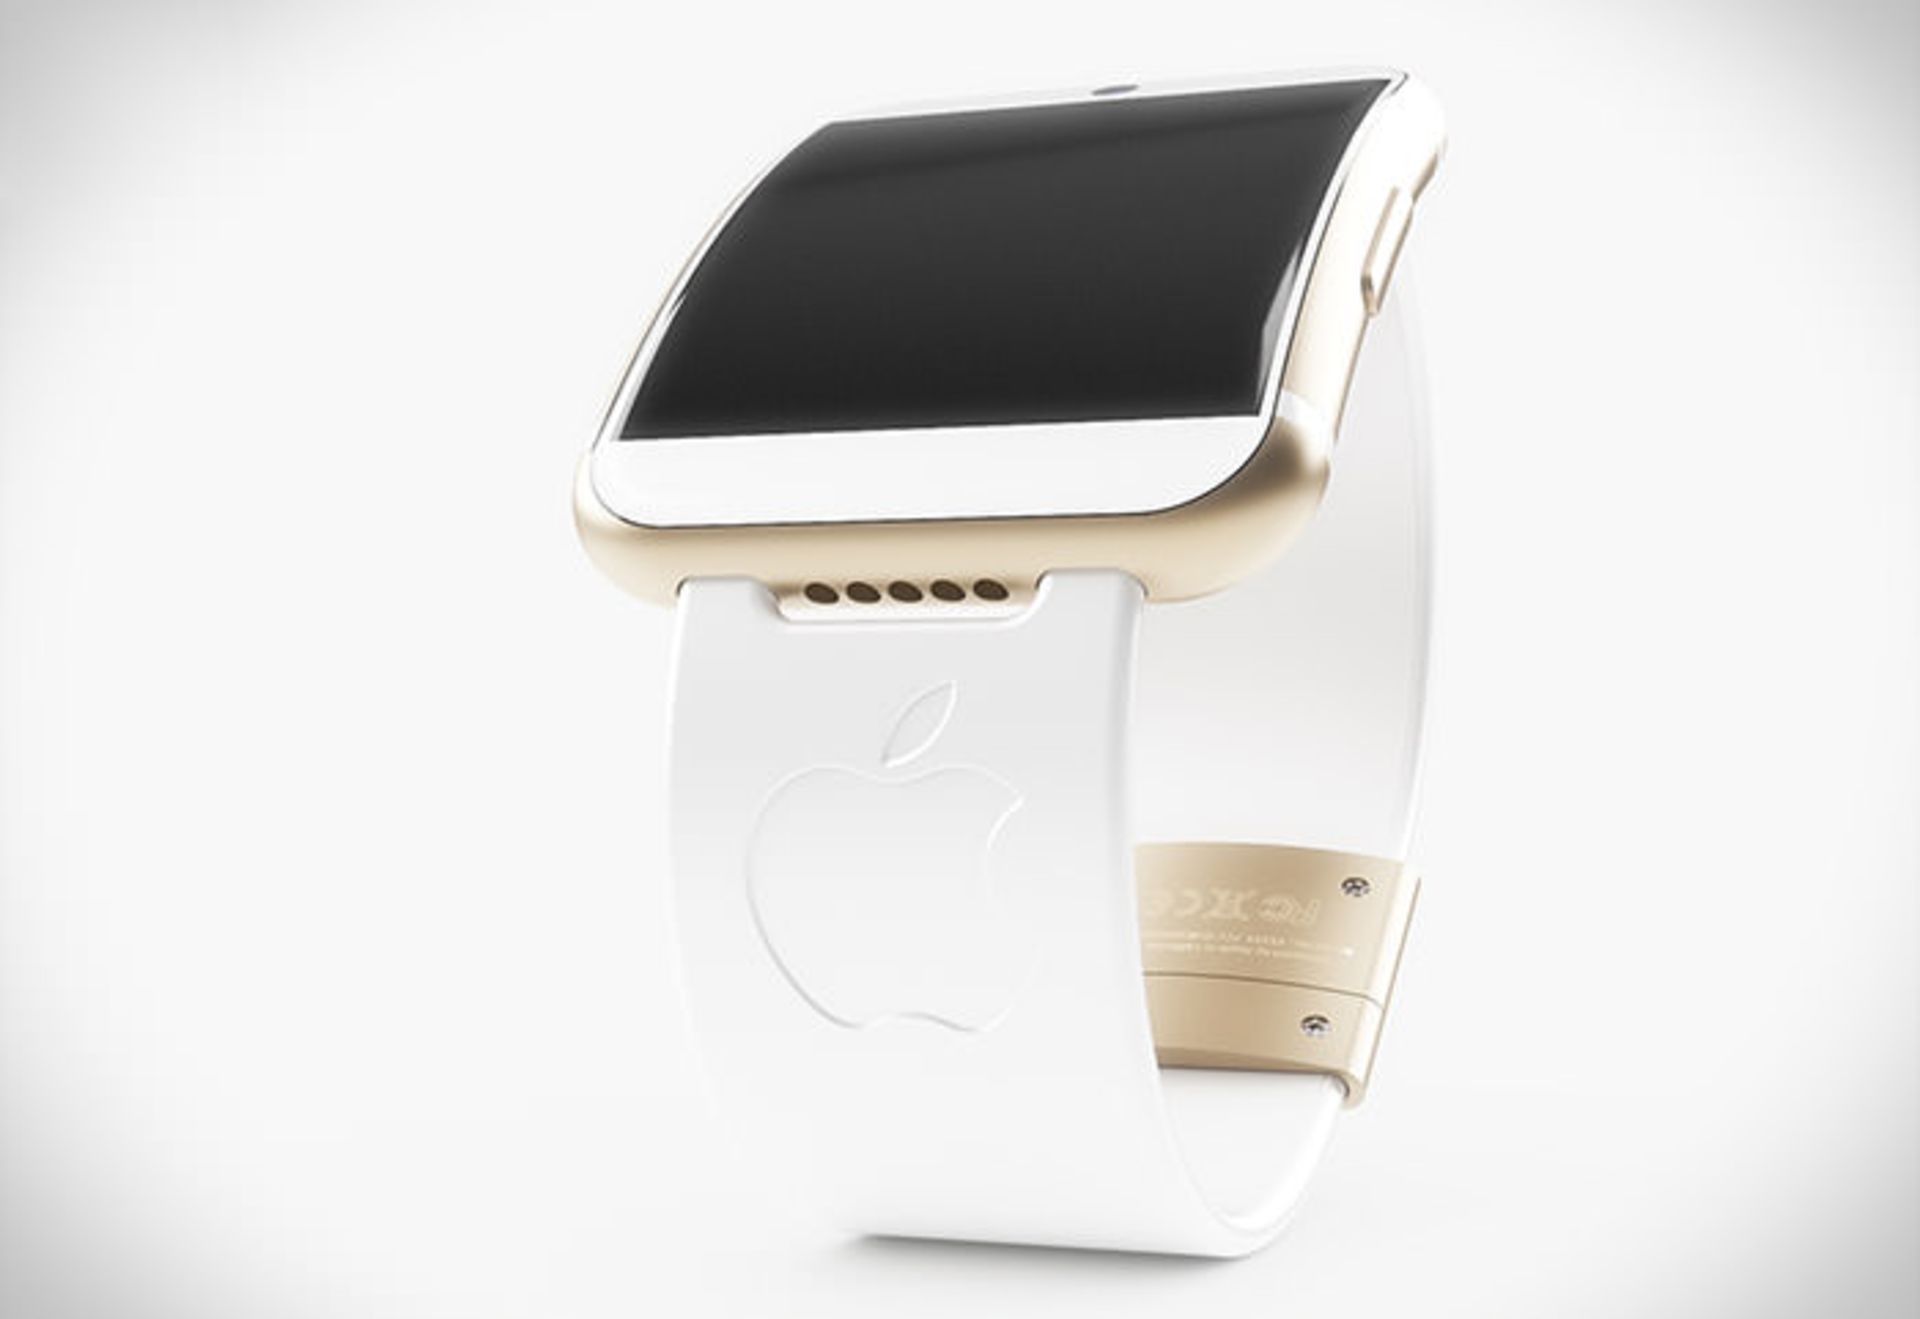 5Apple-iWatch-concept-shows-dreamy-curves-iPhone-esque-looks